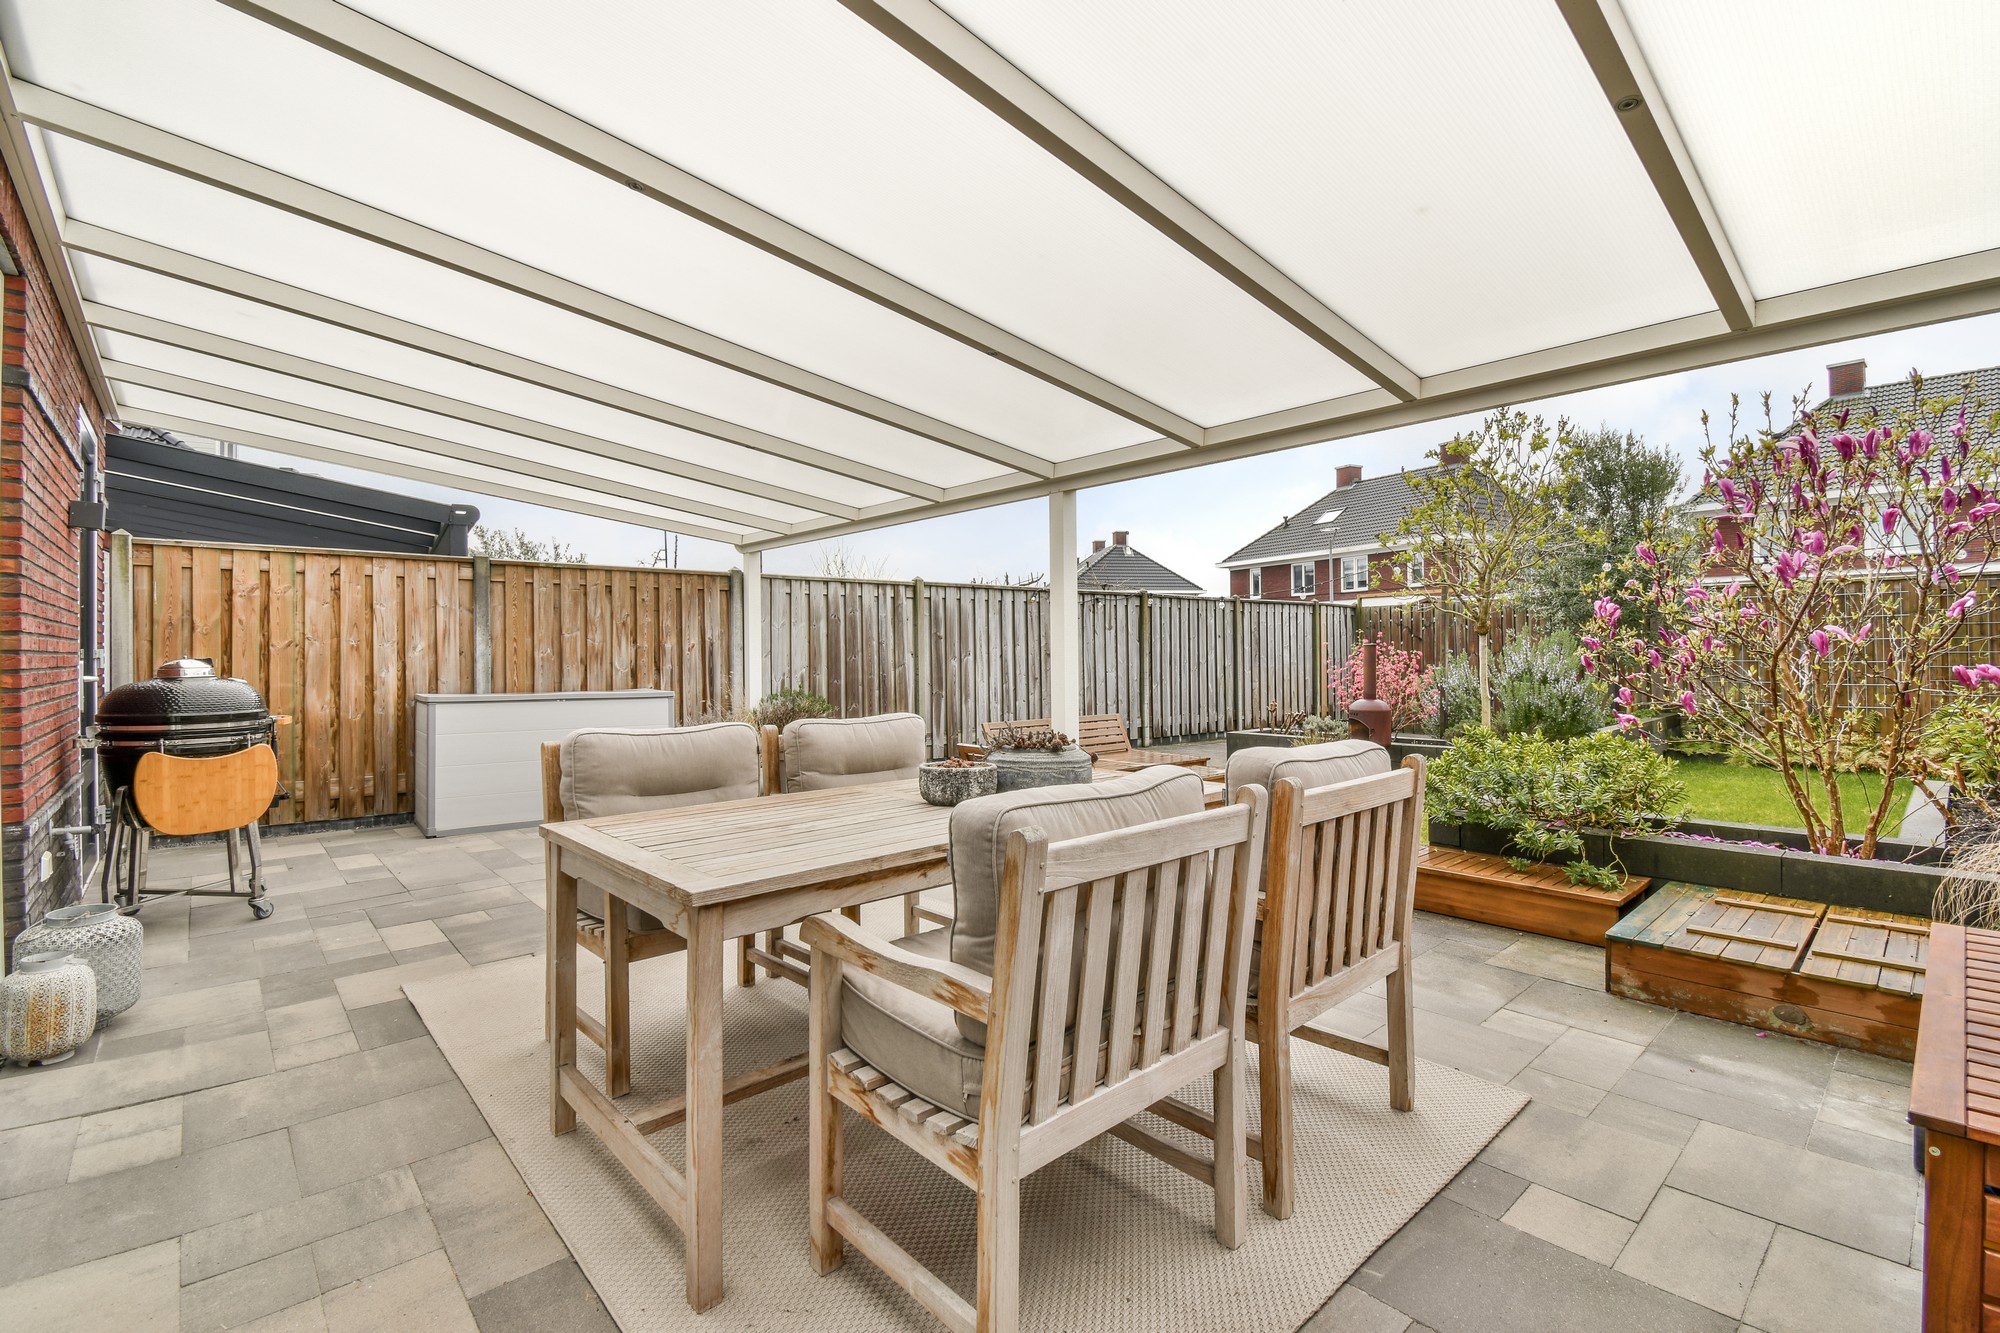 This is an image of an outdoor patio area. The space is covered by a white pergola, which provides shelter while still allowing some light to filter through. The patio is furnished with a wooden dining table set that includes a bench and chairs with grey cushions, creating a cosy outdoor dining space. There is also an outdoor kitchen or barbecue area on the left side, featuring a grill. Woven and patterned outdoor rugs are placed on the tile flooring to add warmth and texture to the setting.In the background, there is a wooden fence that encloses the backyard, providing privacy. Beyond the patio area is a well-maintained garden with green grass, a variety of plants, and some blooming pink flowers. The surrounding environment includes residential houses, suggesting the image is taken in a suburban neighborhood.